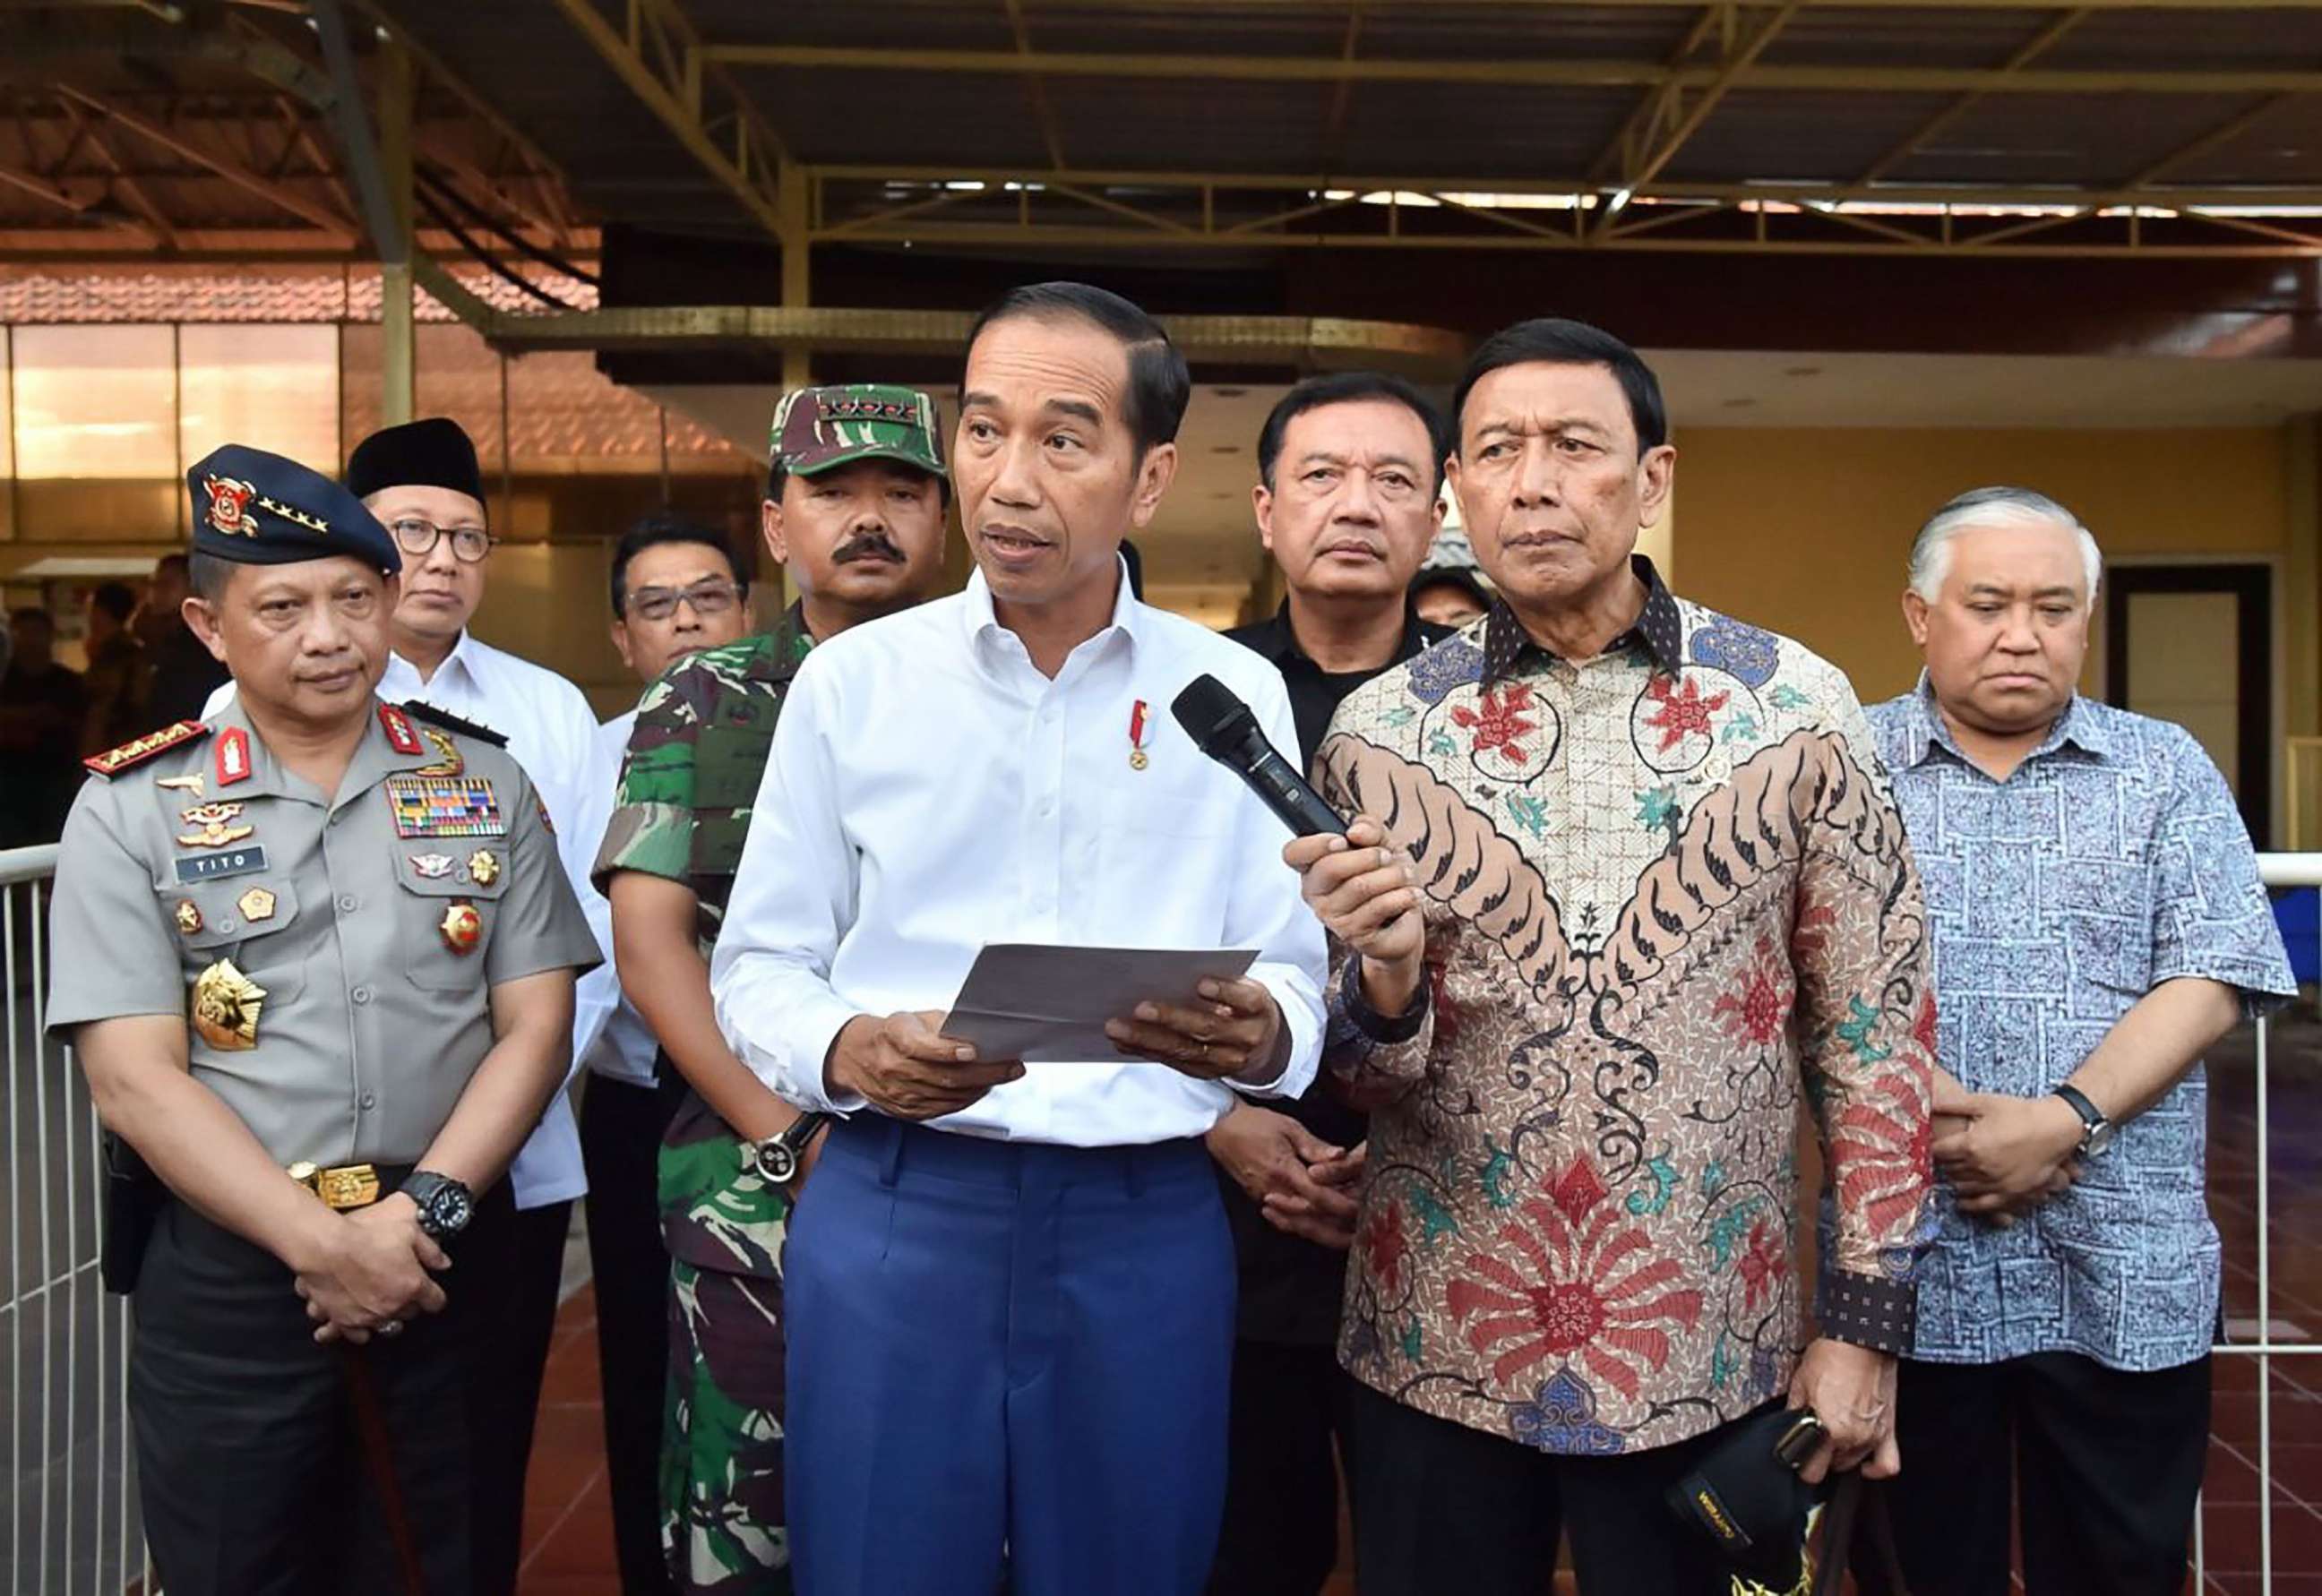 PHOTO: This handout photo released by the Presidential Palace on May 13, 2018 shows Indonesia's President Joko Widodo (C) and other officials holding a press conference in Surabaya after a series of suicide bombings.